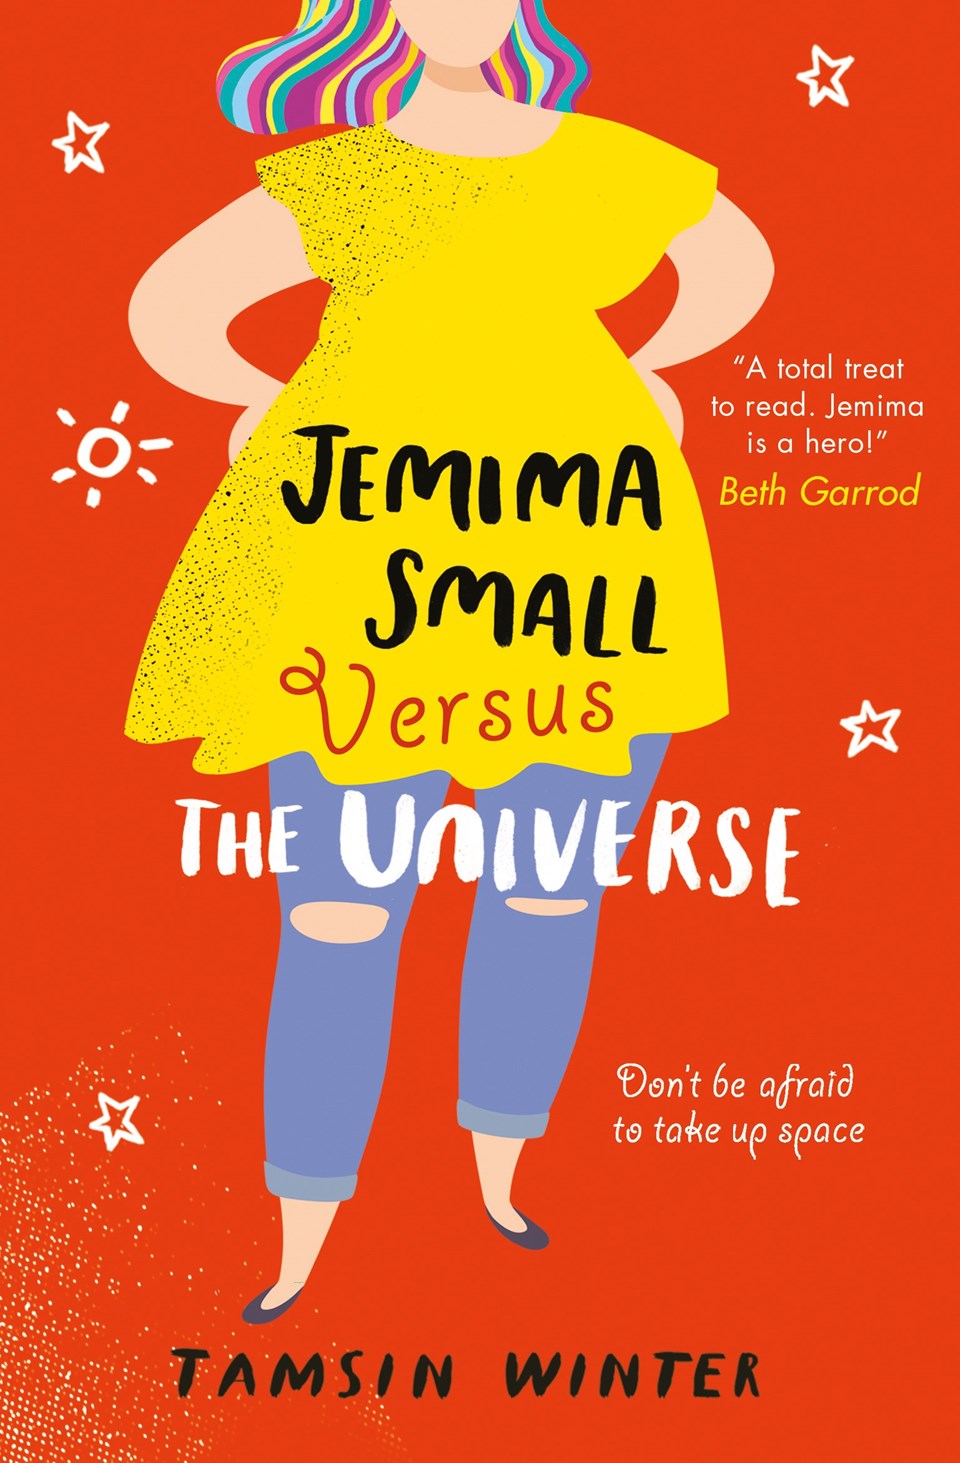 Tamsin Winter Guest Post – Jemima Small Versus the Universe